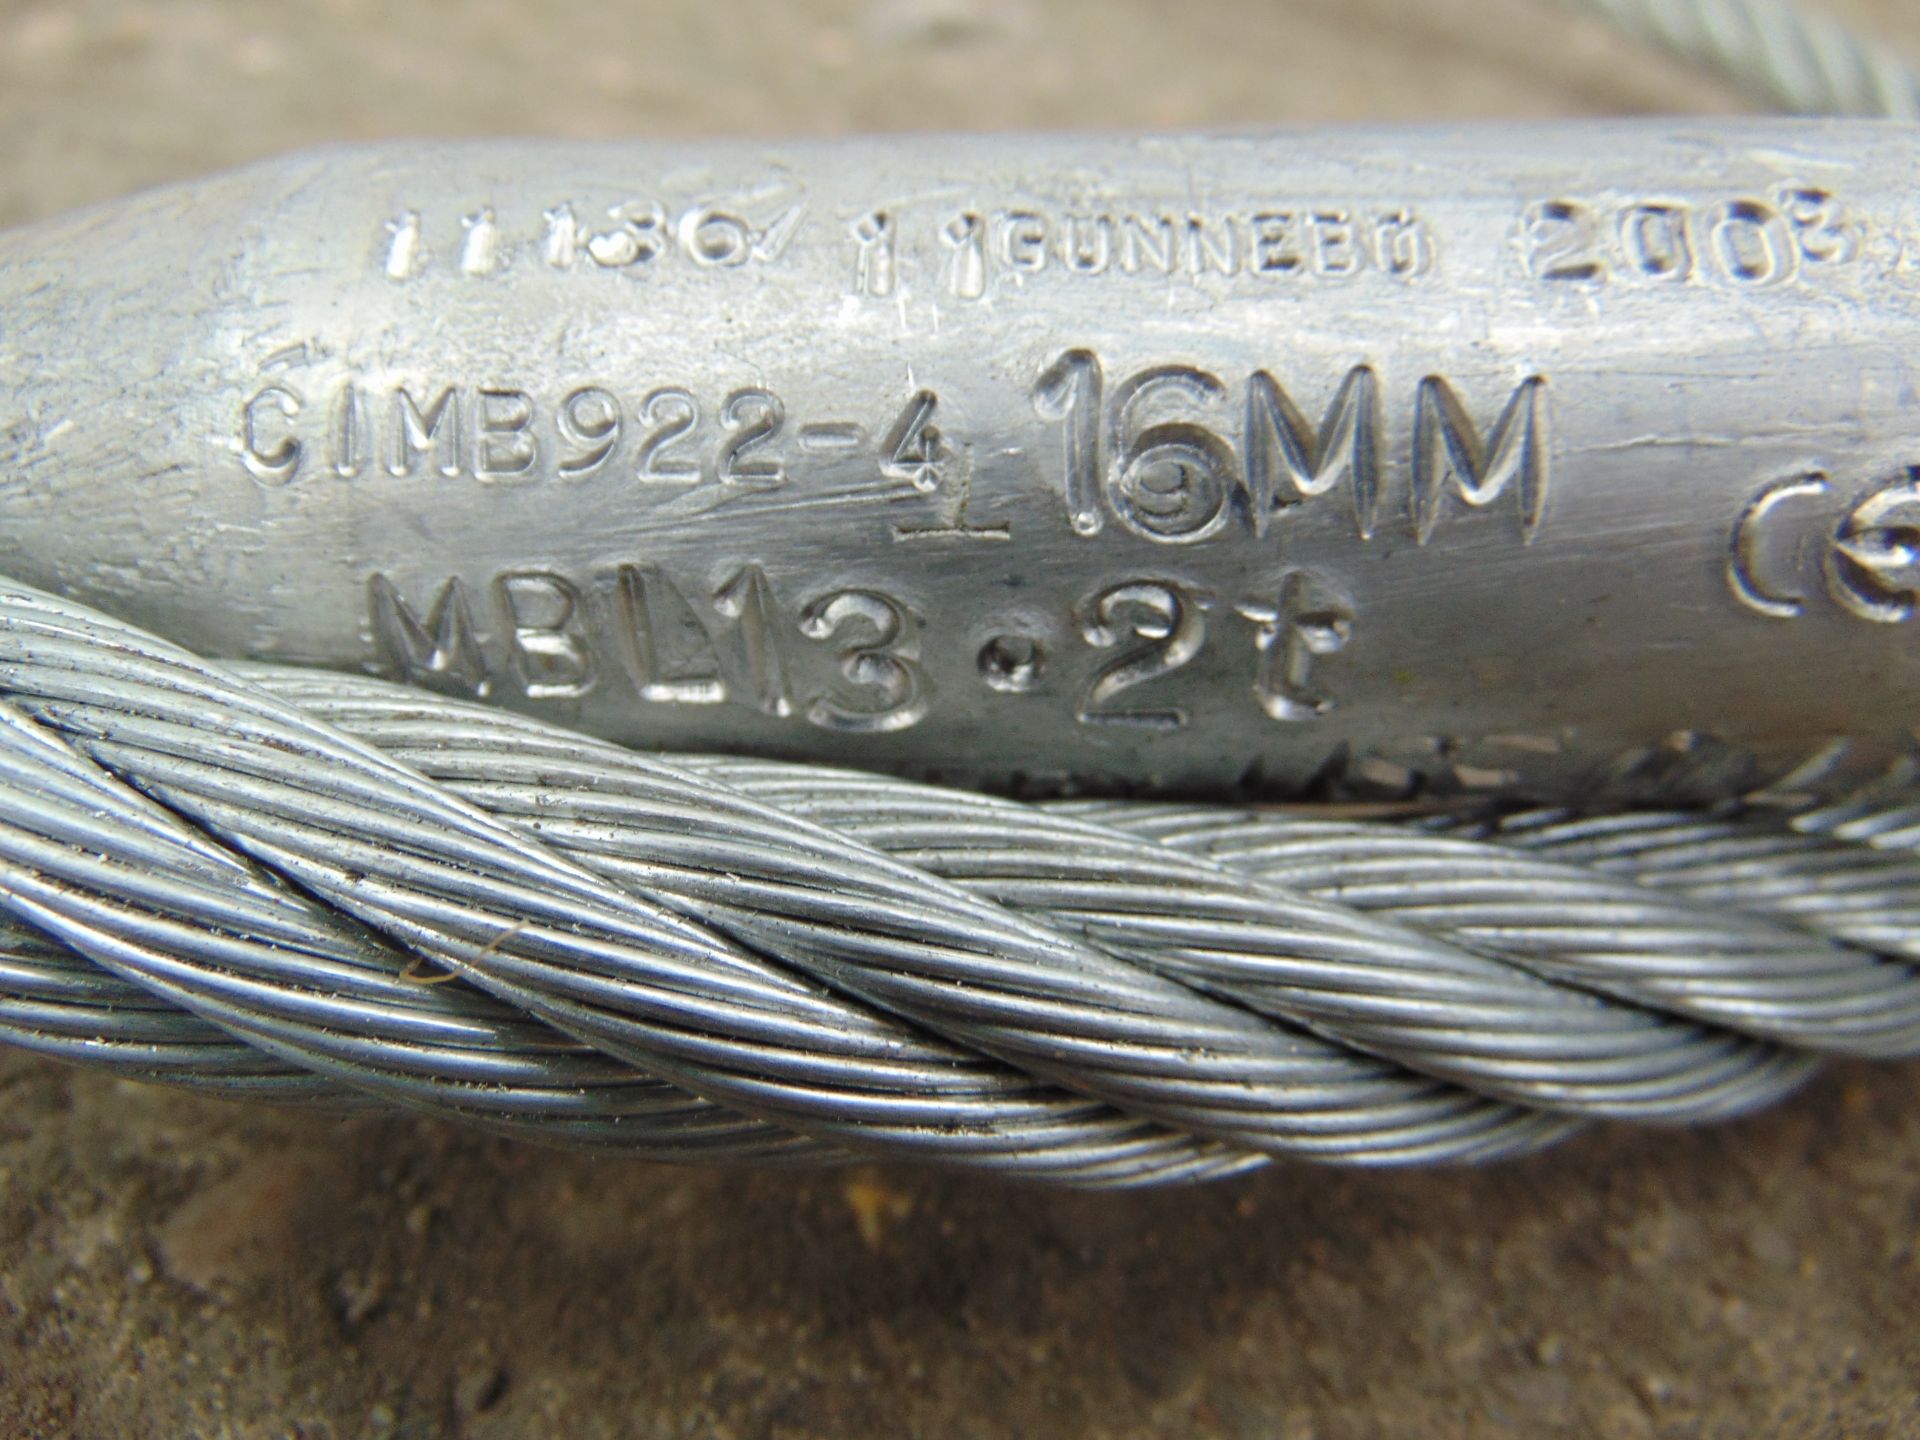 2x Unissued Gunnebo 16mm 13.2 Ton Wire Rope and Chain assys - Image 5 of 5